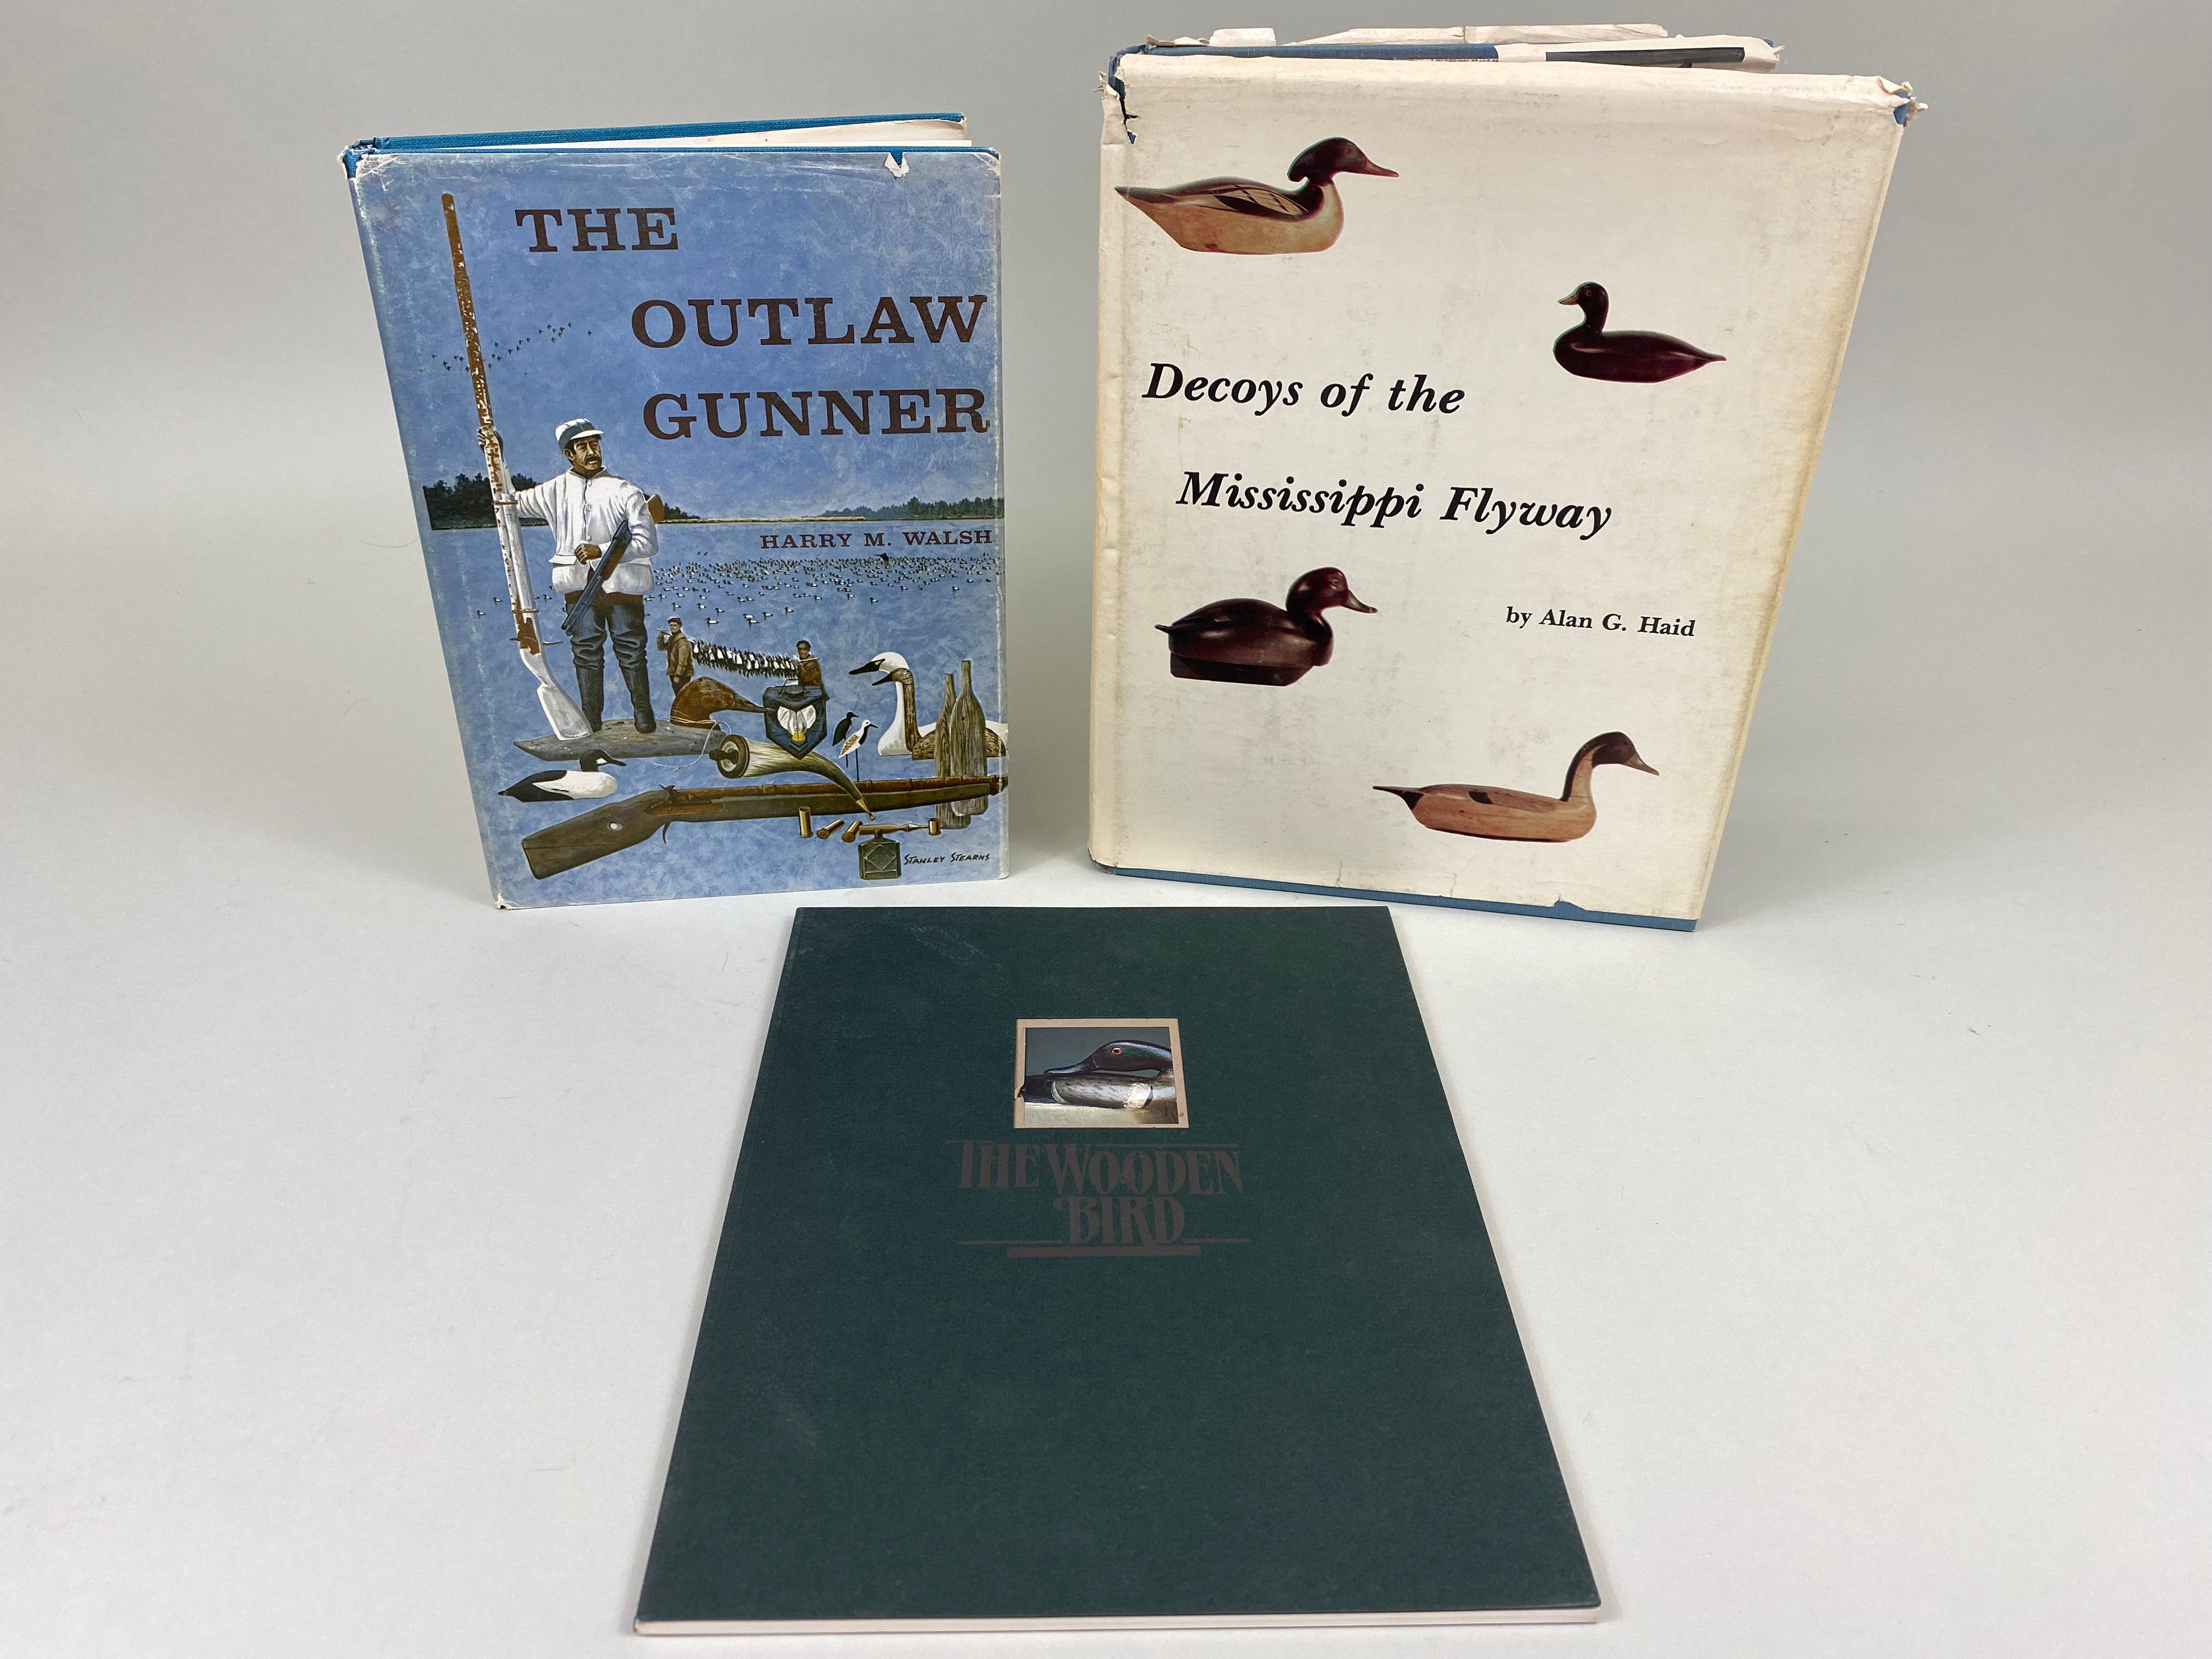 Sold tagged Reference Books - Muddy Water Decoys